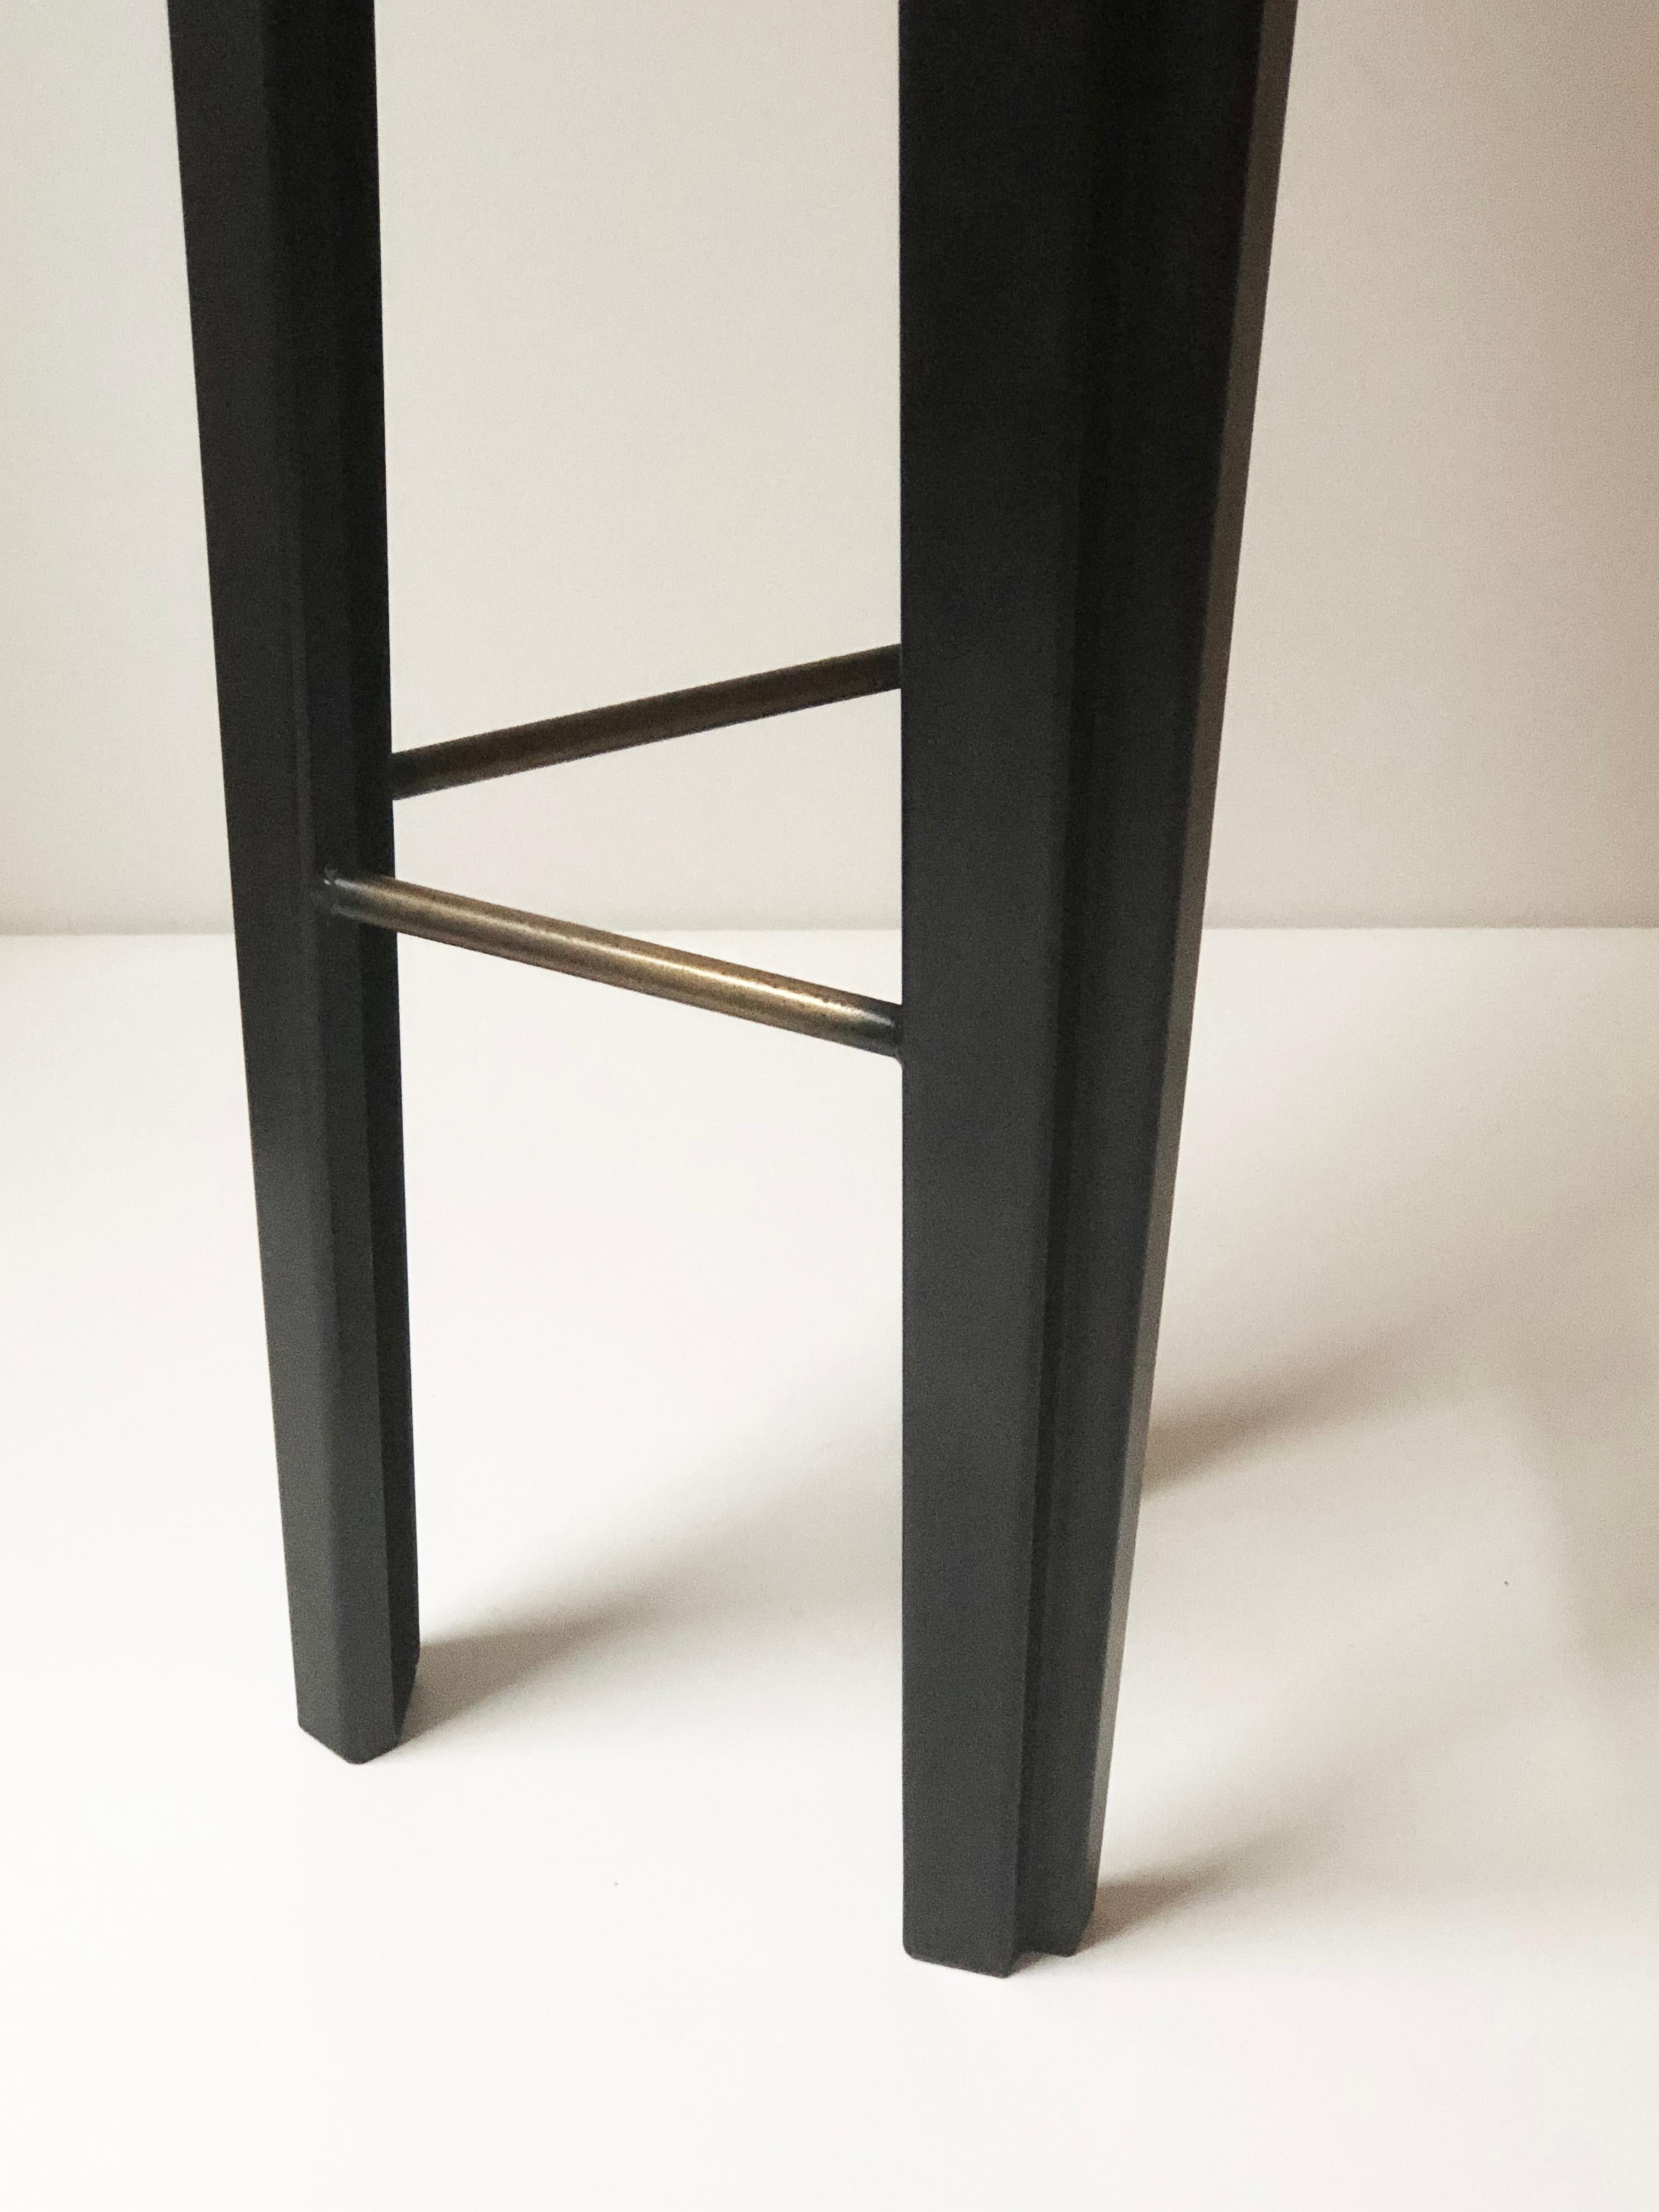 Ebonized oak bar stool signed by Cal Summers
Materials: Ebonized oak, blackened steel
Steel insert with bronze finish
Dimensions: 12 1/2”D x 12 1/2”W x 29”H

Cal Summers is a British designer who makes bespoke handmade furniture and